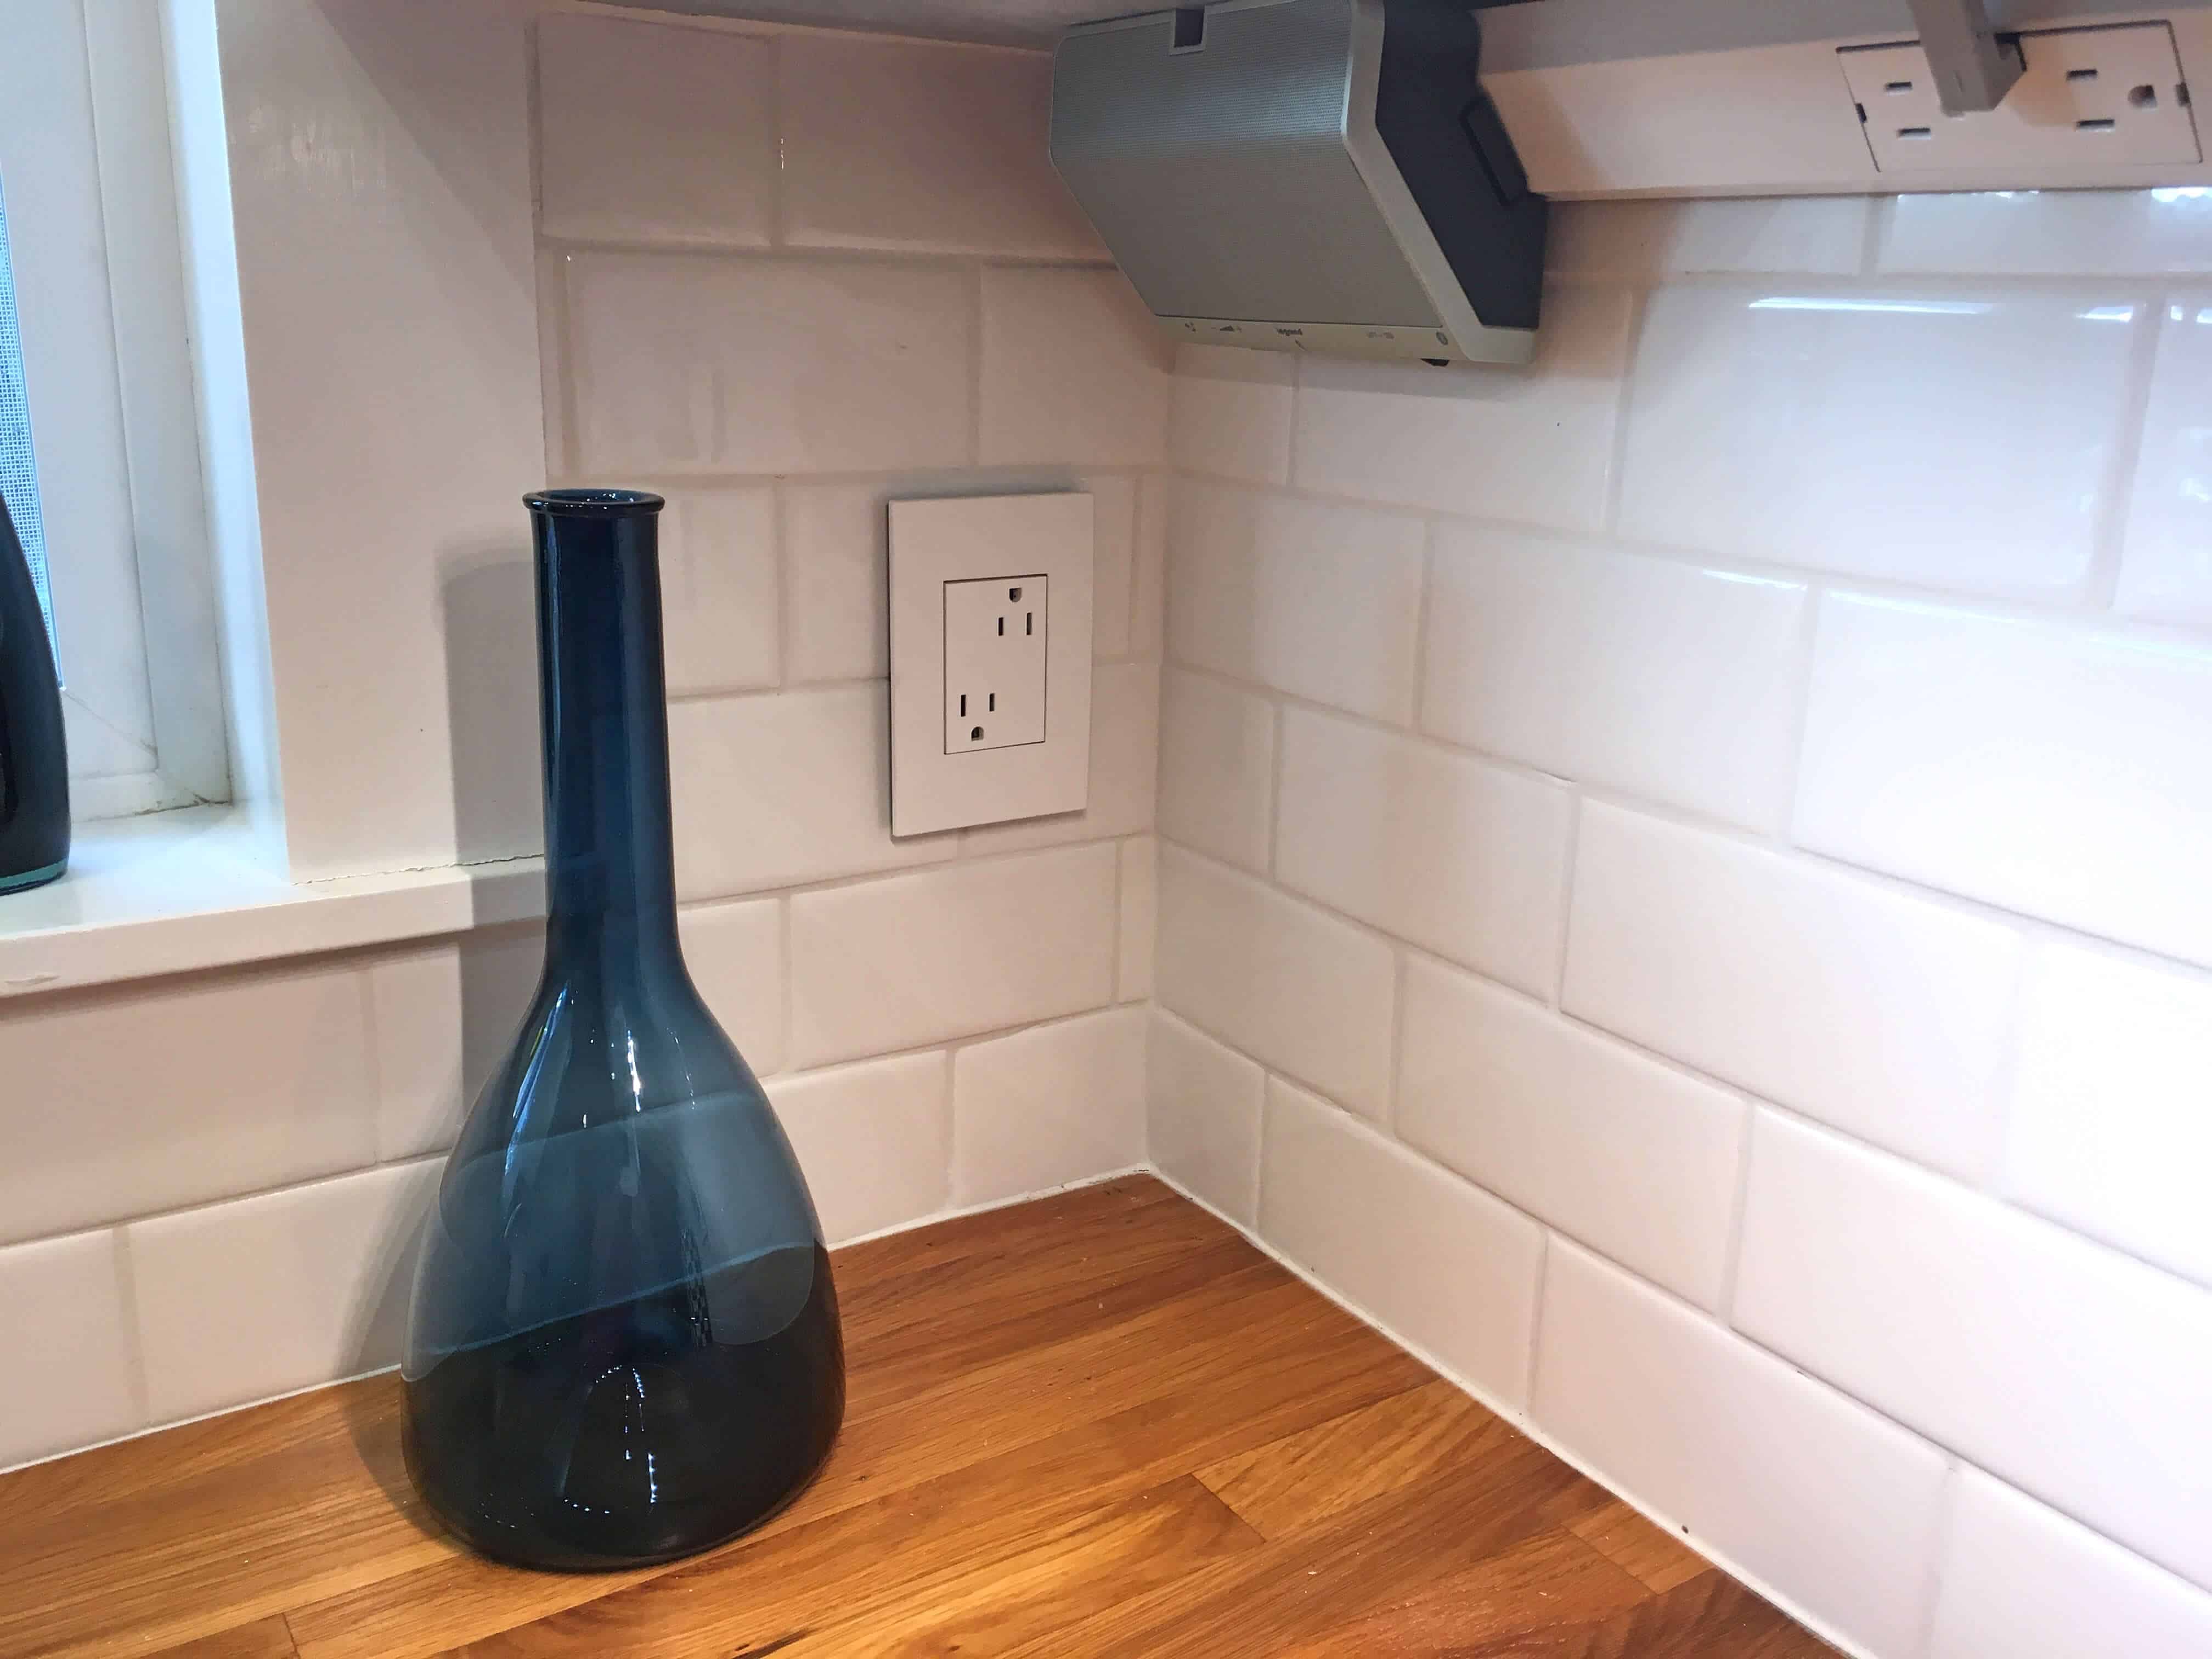 legrand adorne collection review outlets switches under cabinet lighting digital music kit